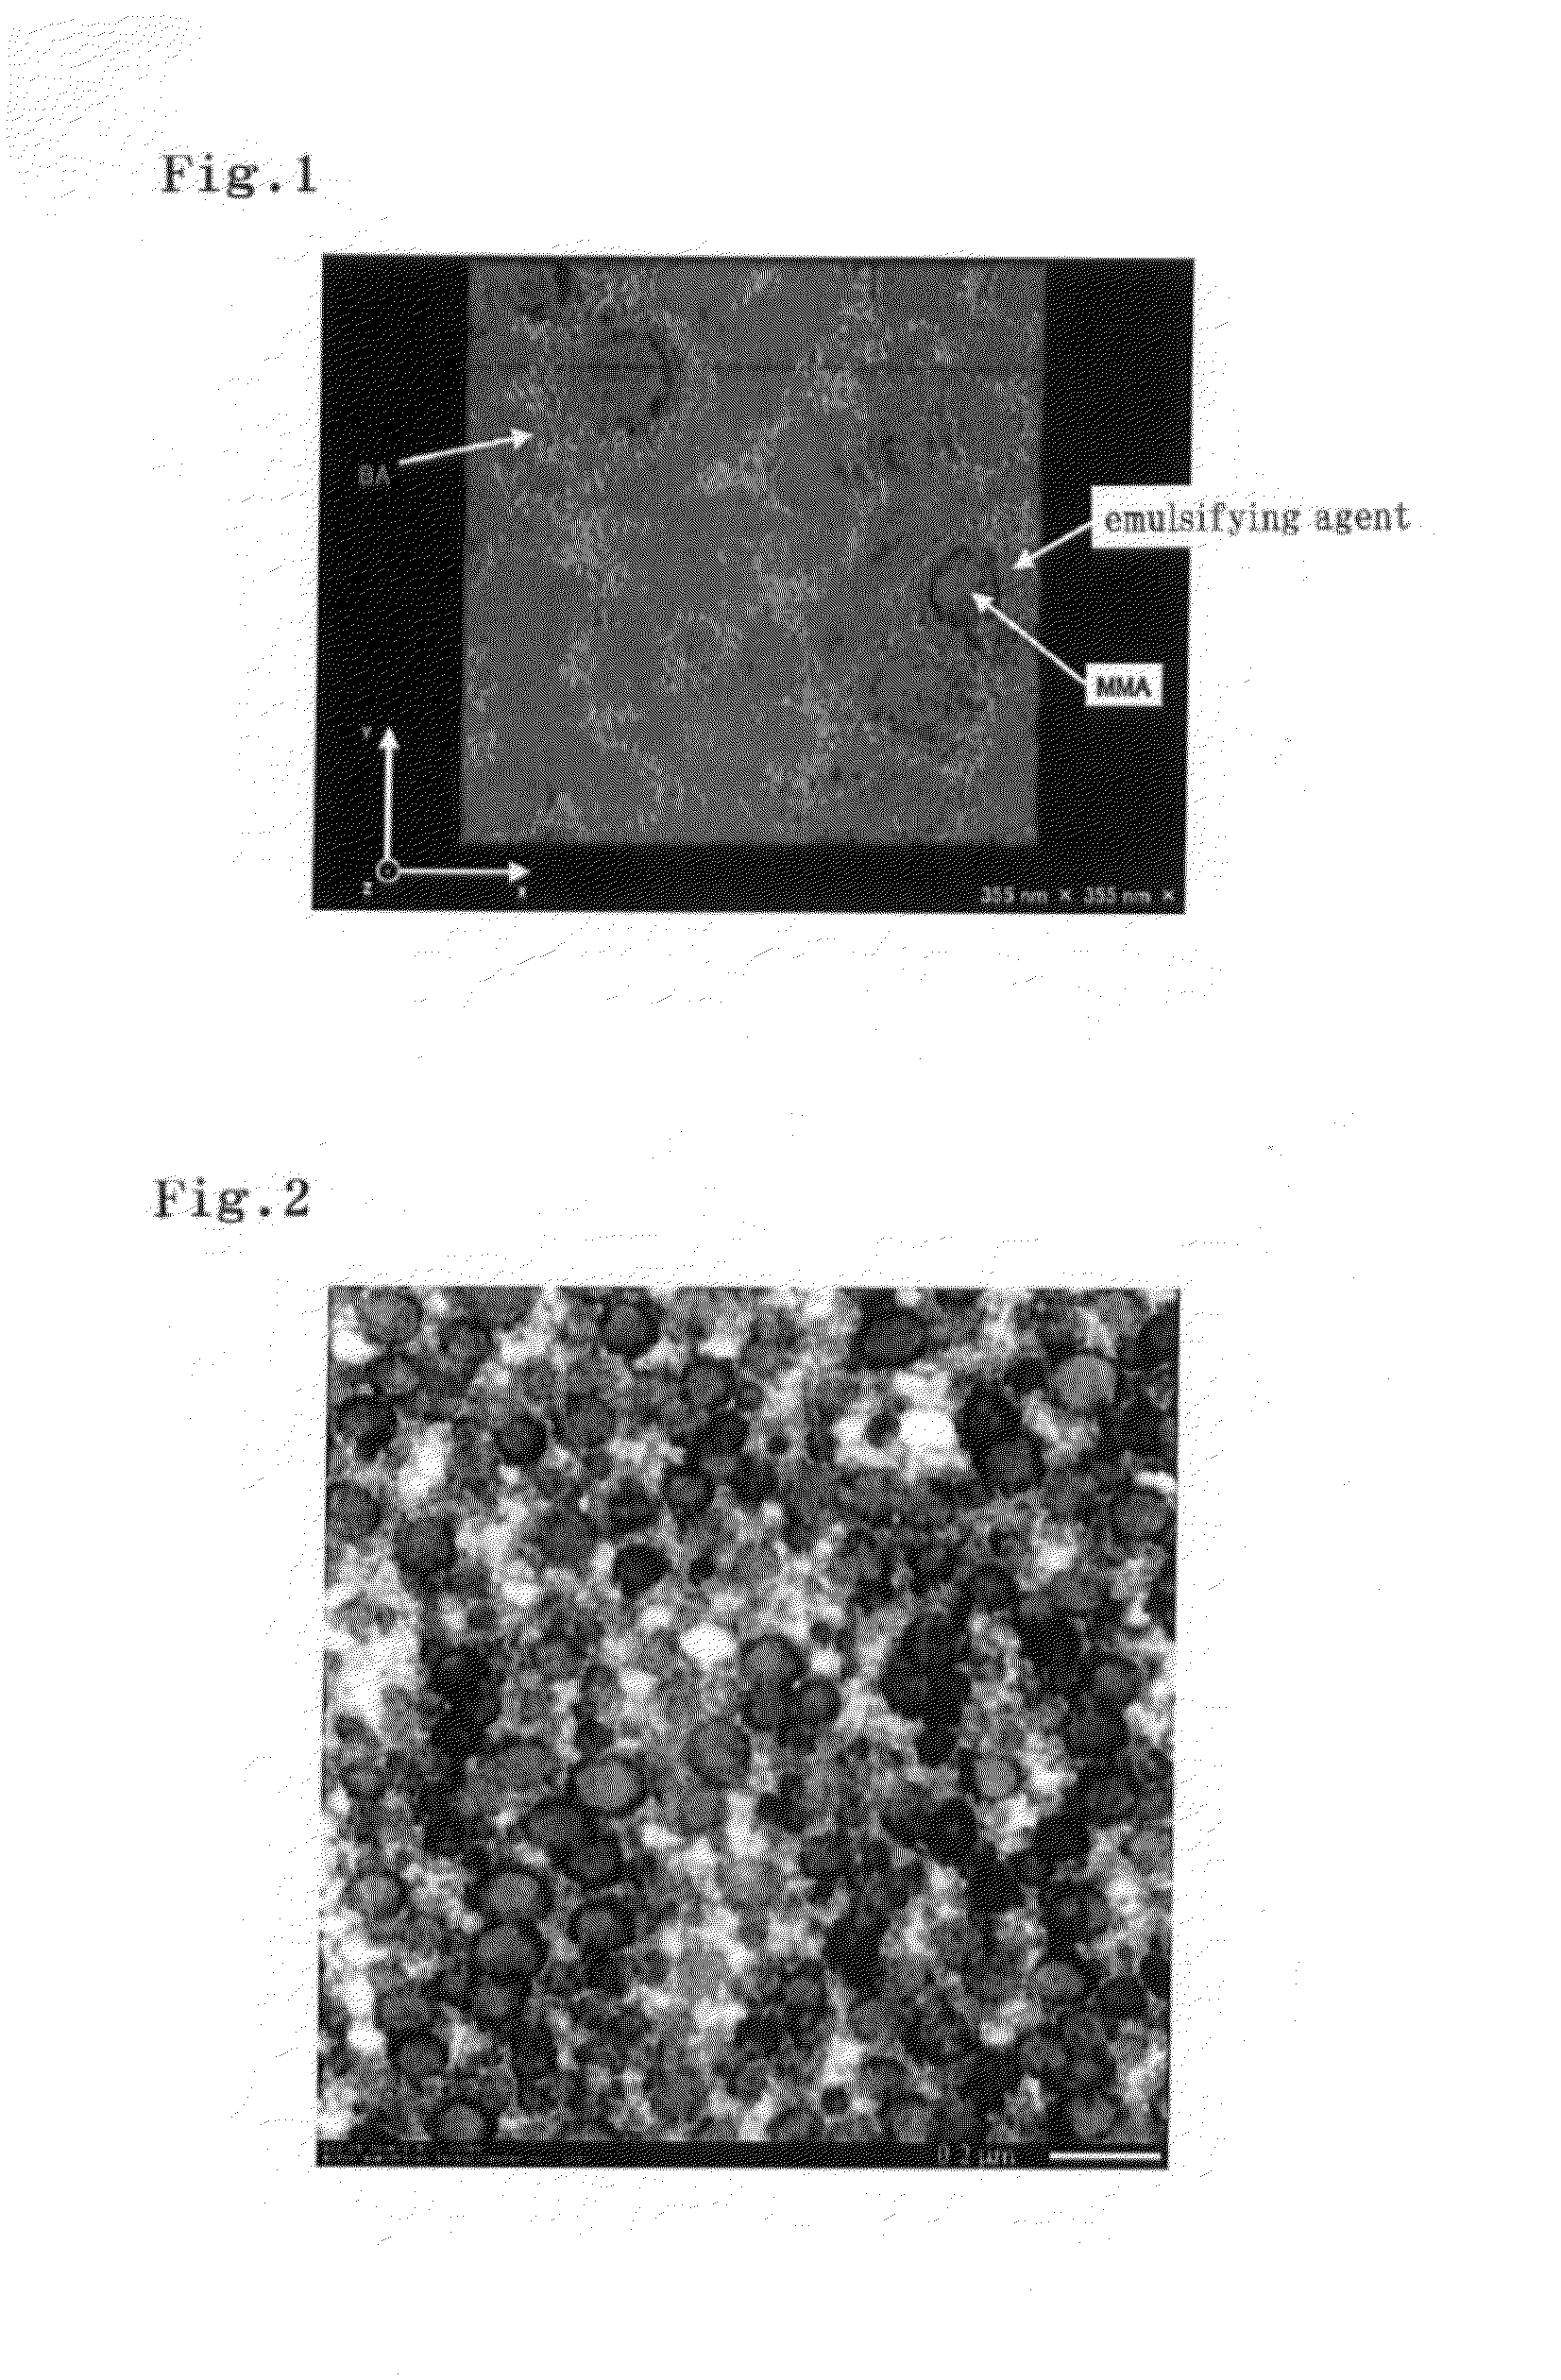 Adhesive layer for optical film, optical film having adhesive layer, image display device, and detachment method for optical film